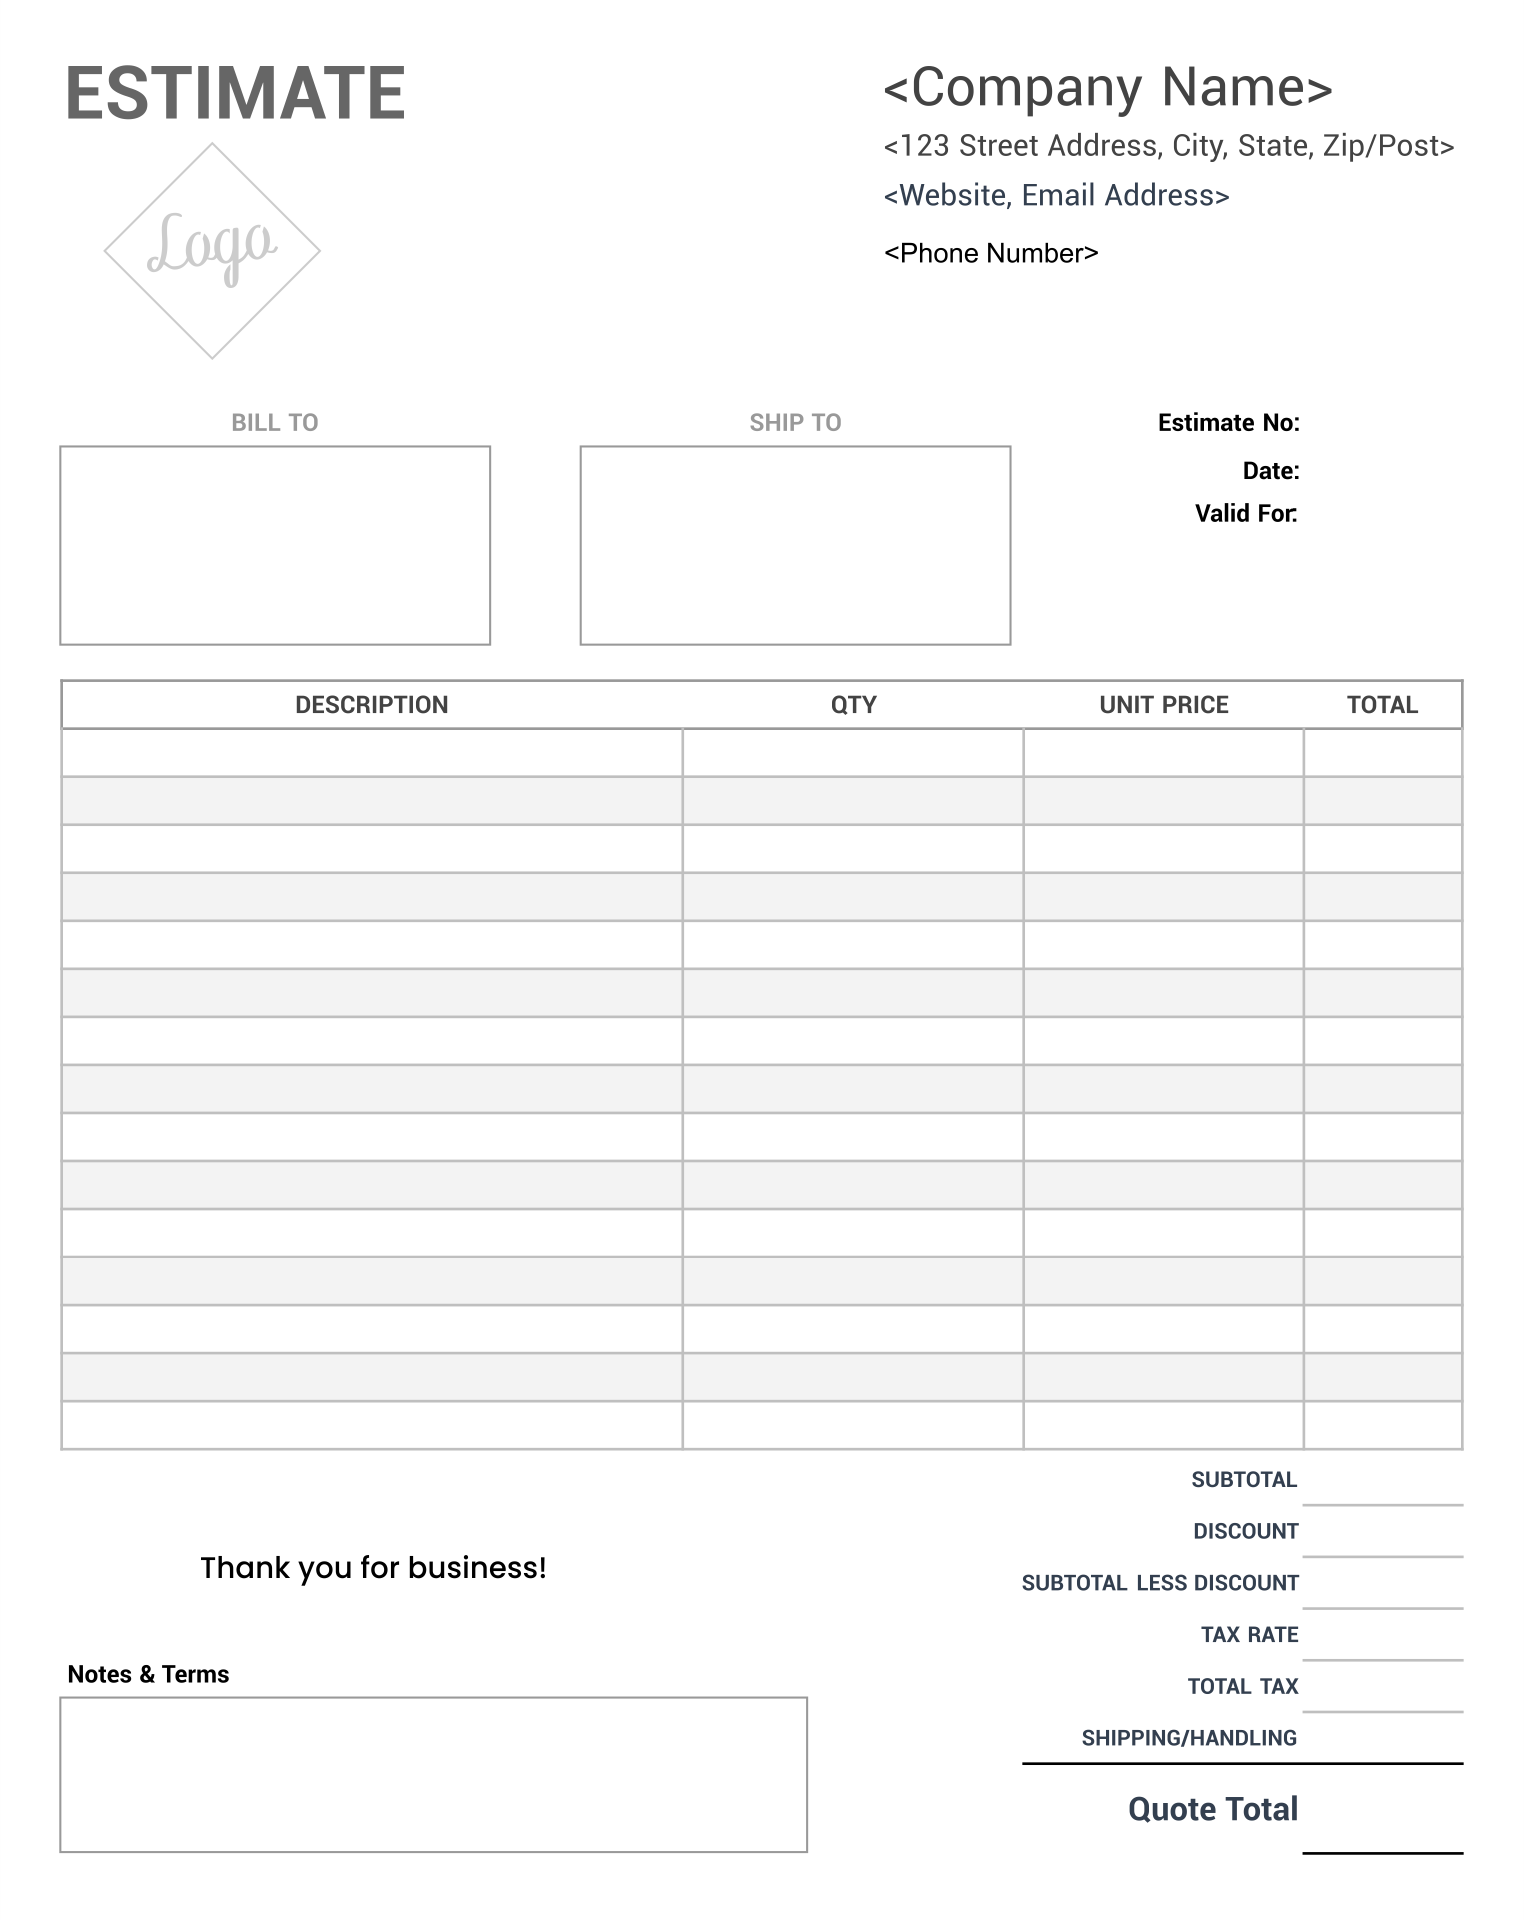 work-estimate-template-for-your-needs